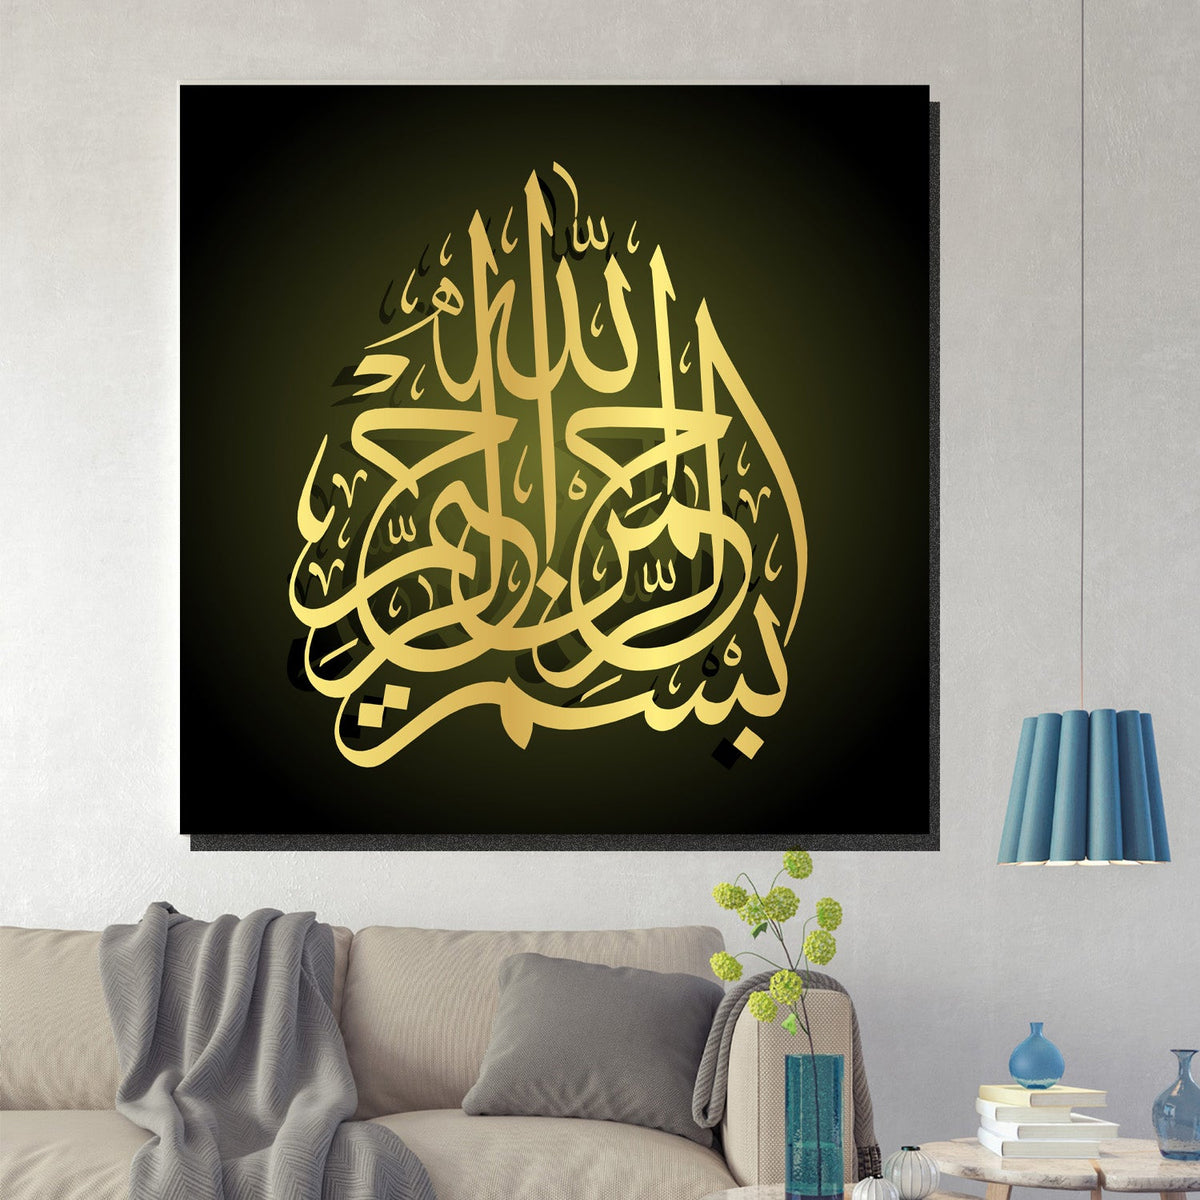 https://cdn.shopify.com/s/files/1/0387/9986/8044/products/IslamicArtLimitedEdition15CanvasArtprintStretched-1.jpg